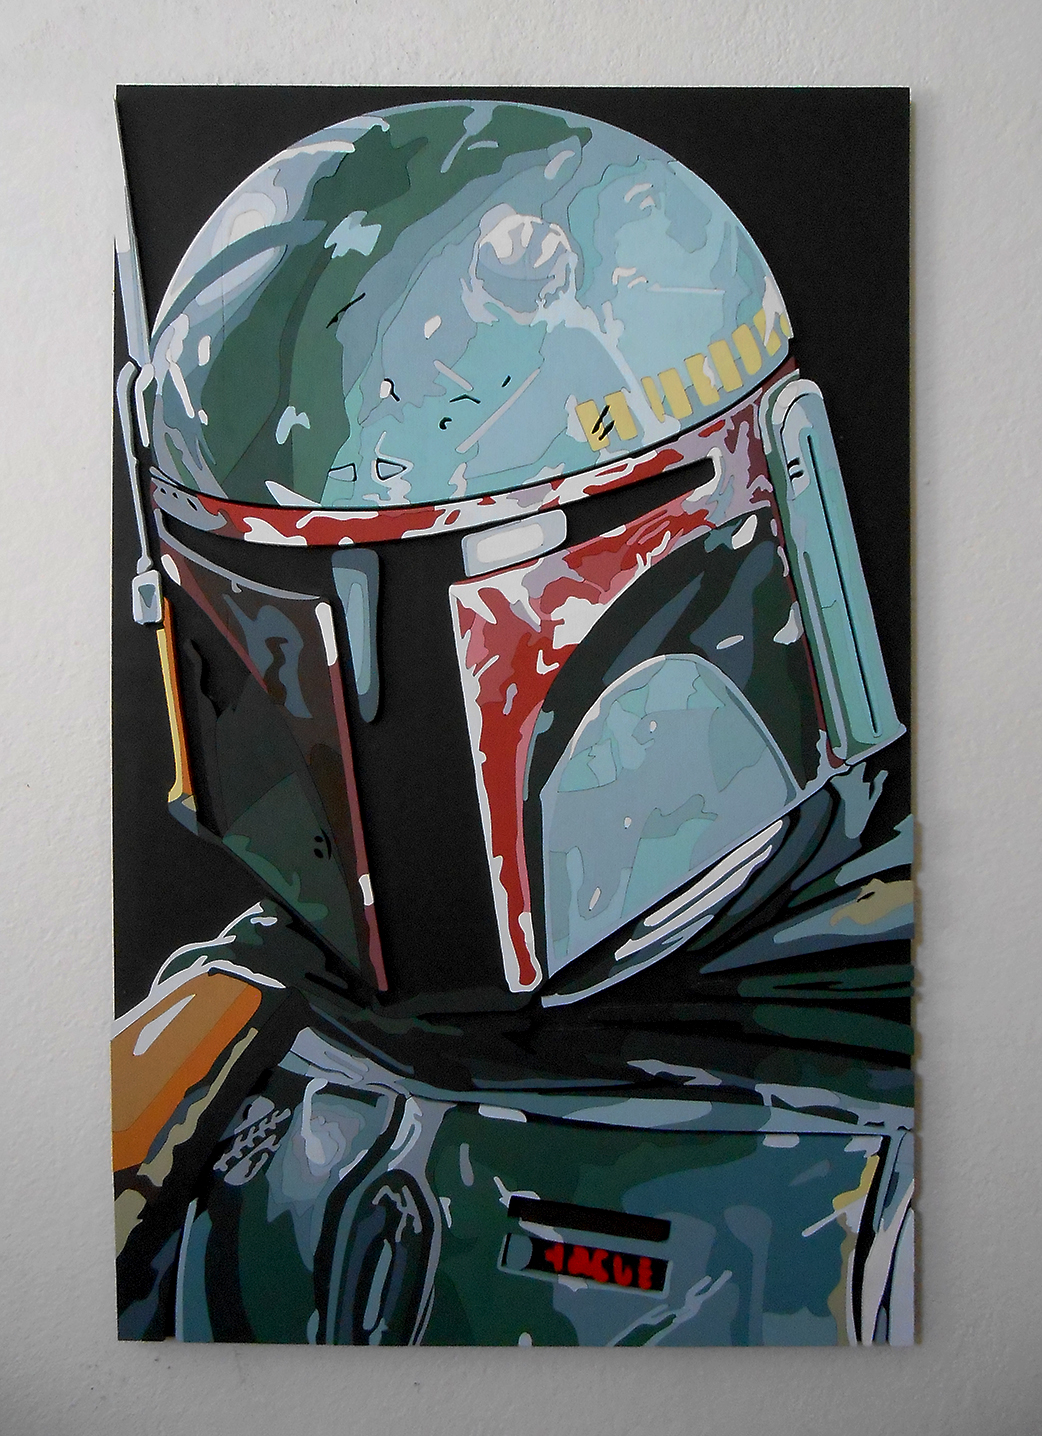 I made a portrait of Boba Fett out of plywood. I hope you want it.